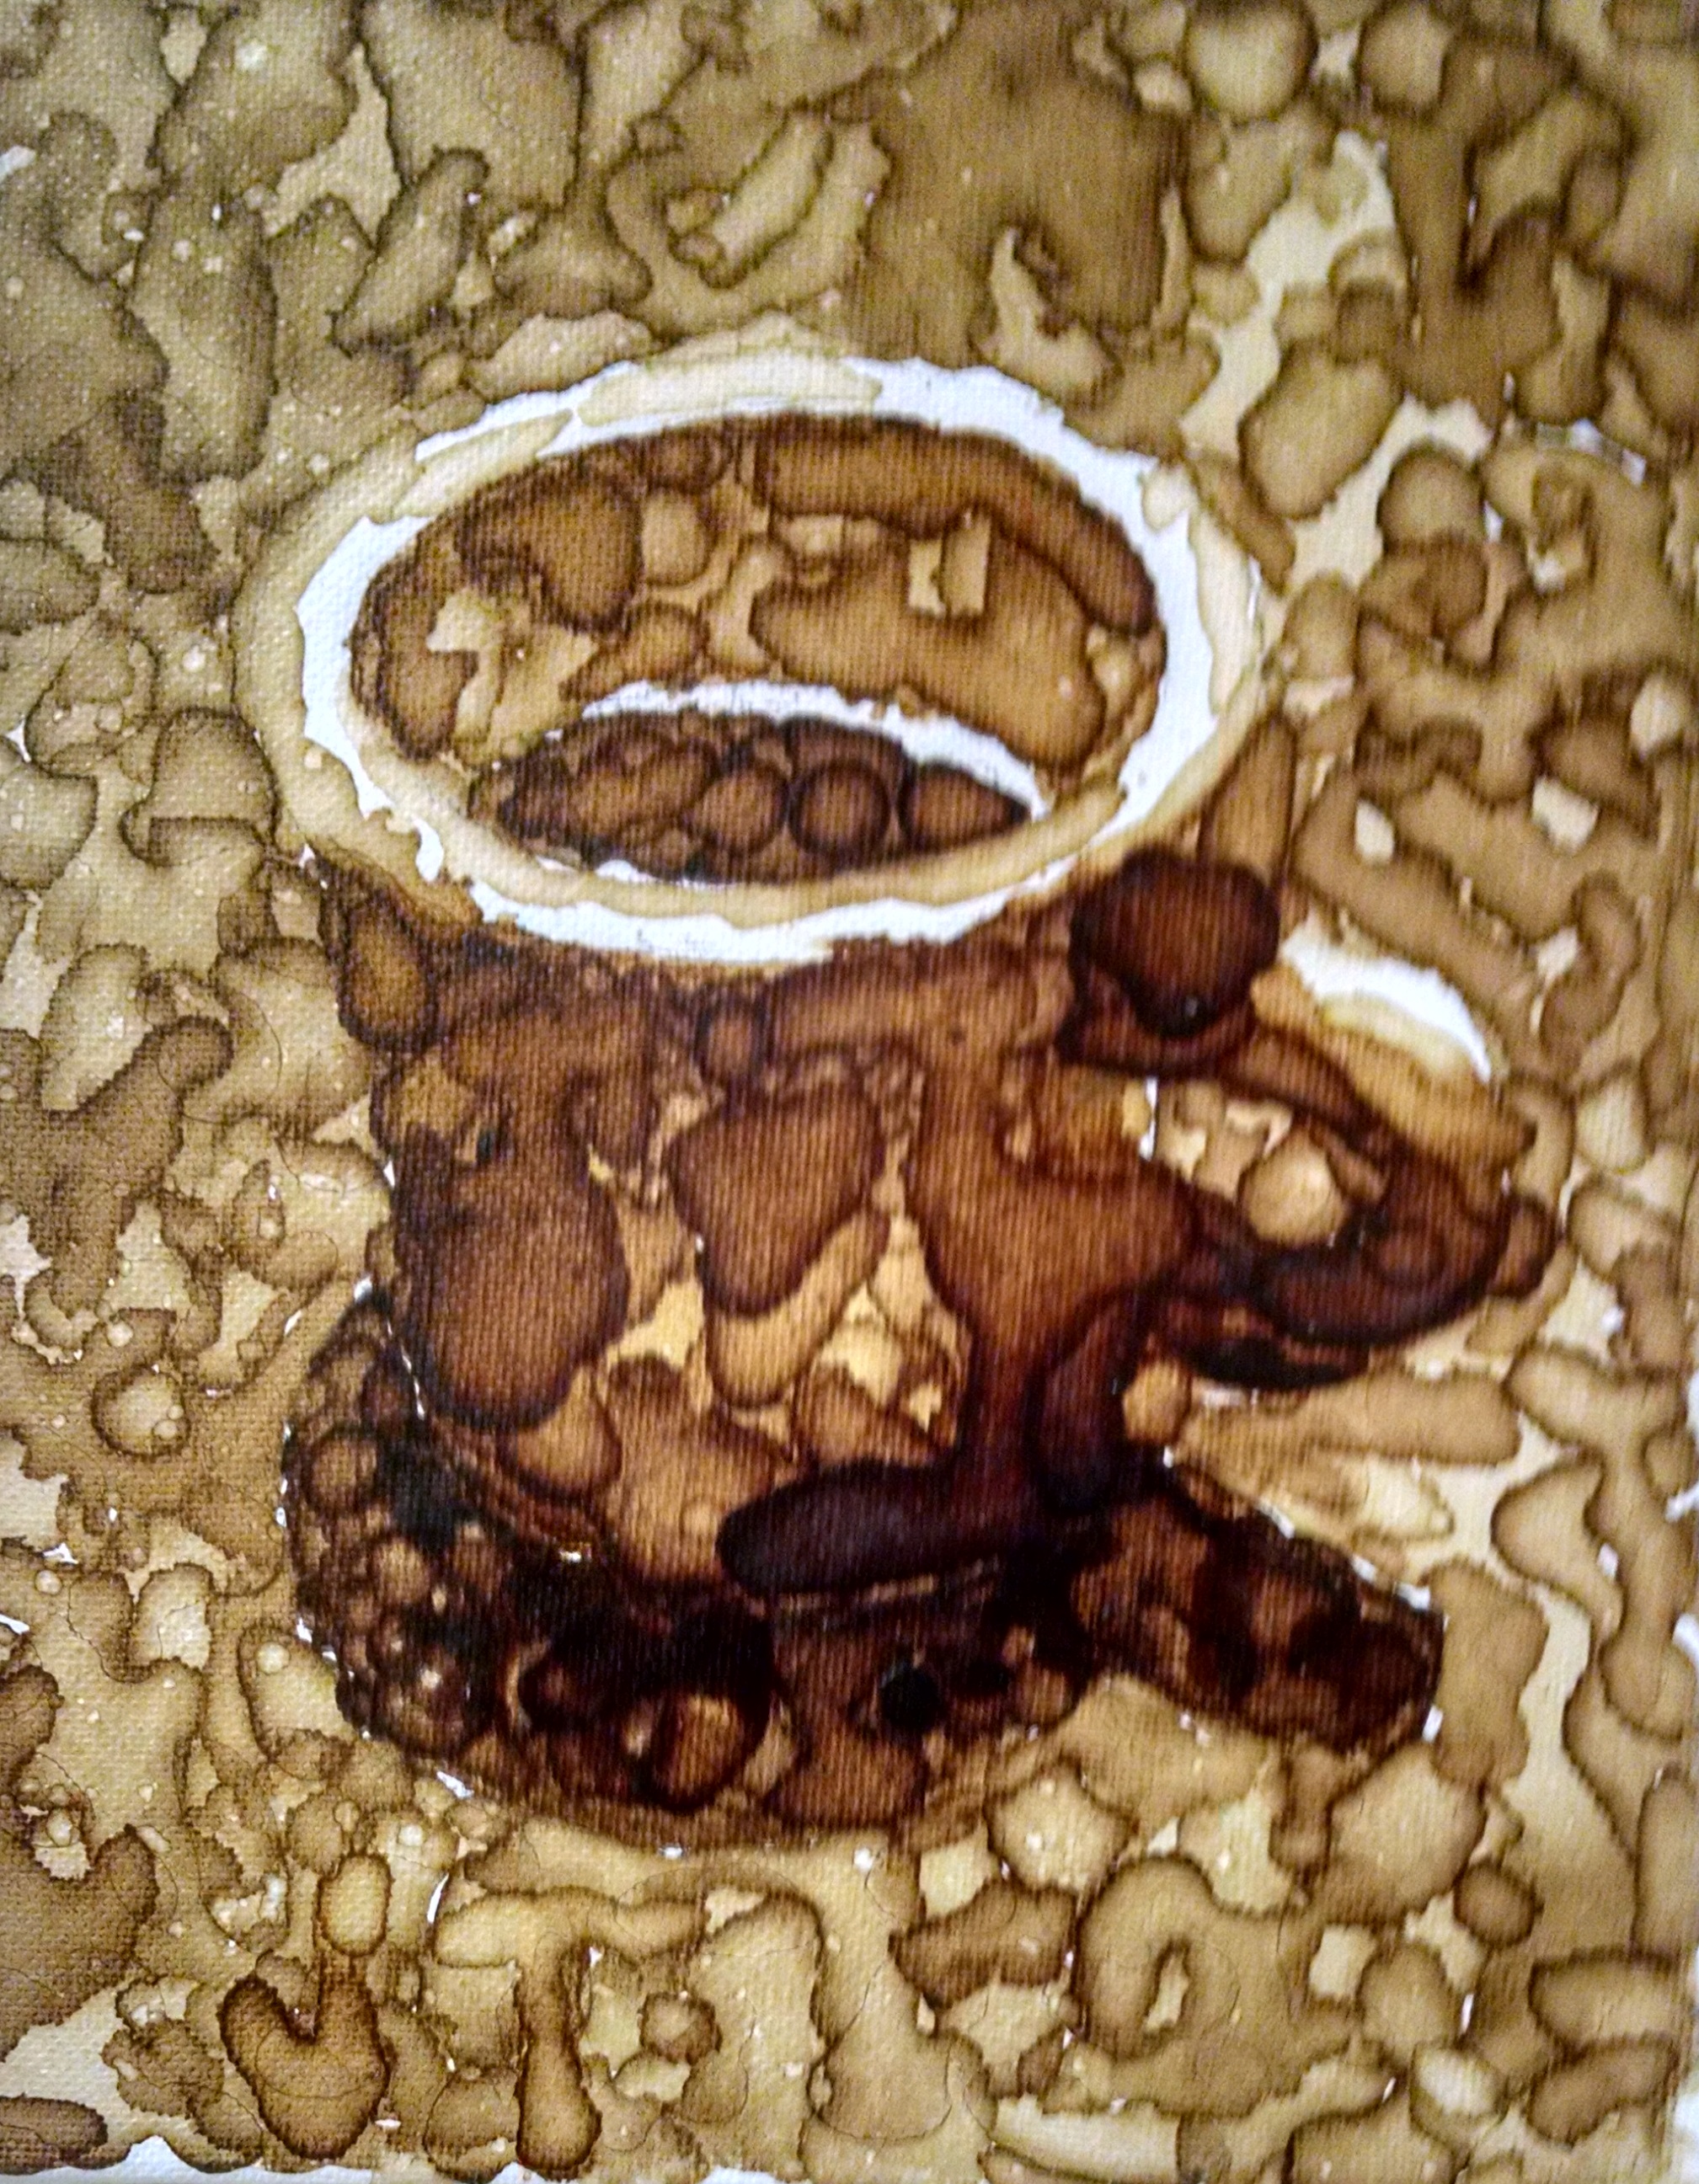 a cup using spilled coffee puddles